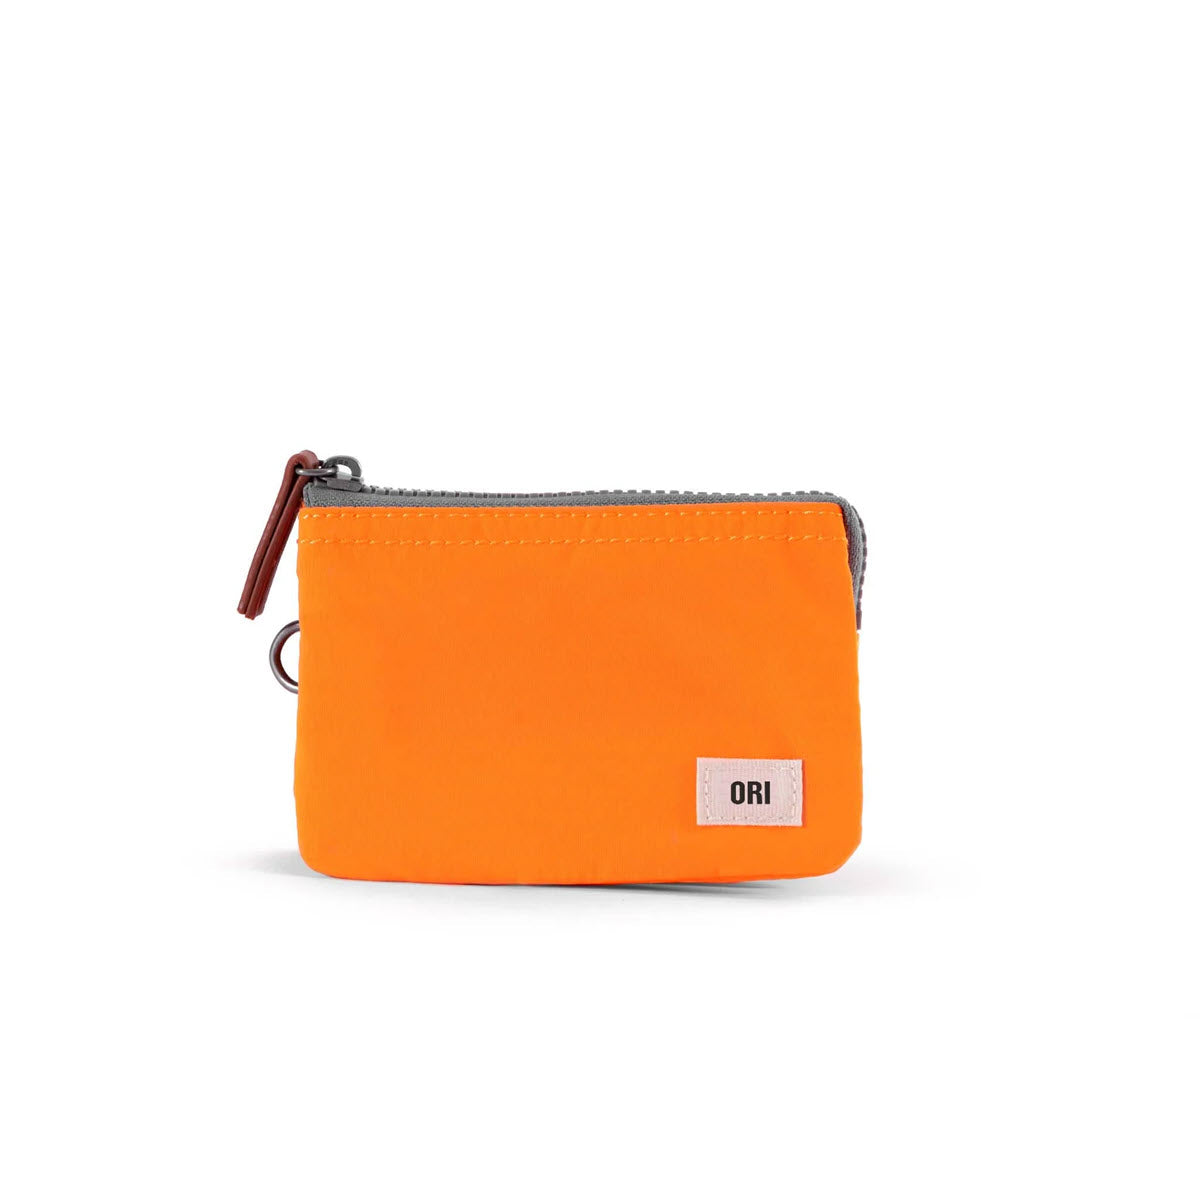 A small, orange Ori London Carnaby pouch with a black tag labeled "ori" on a white background.